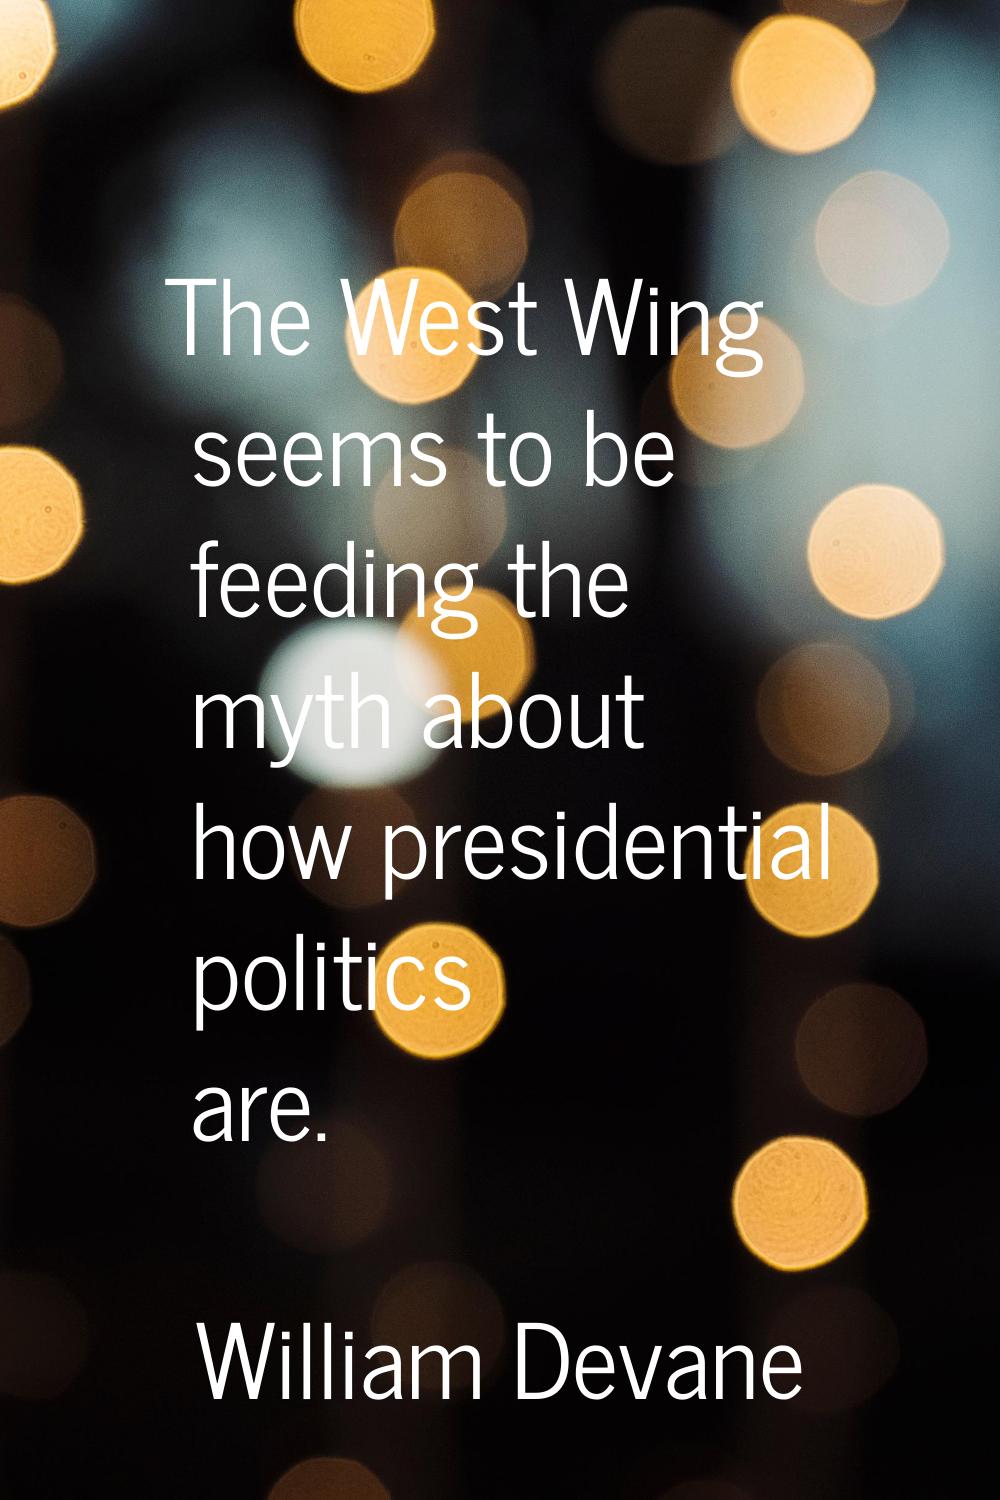 The West Wing seems to be feeding the myth about how presidential politics are.